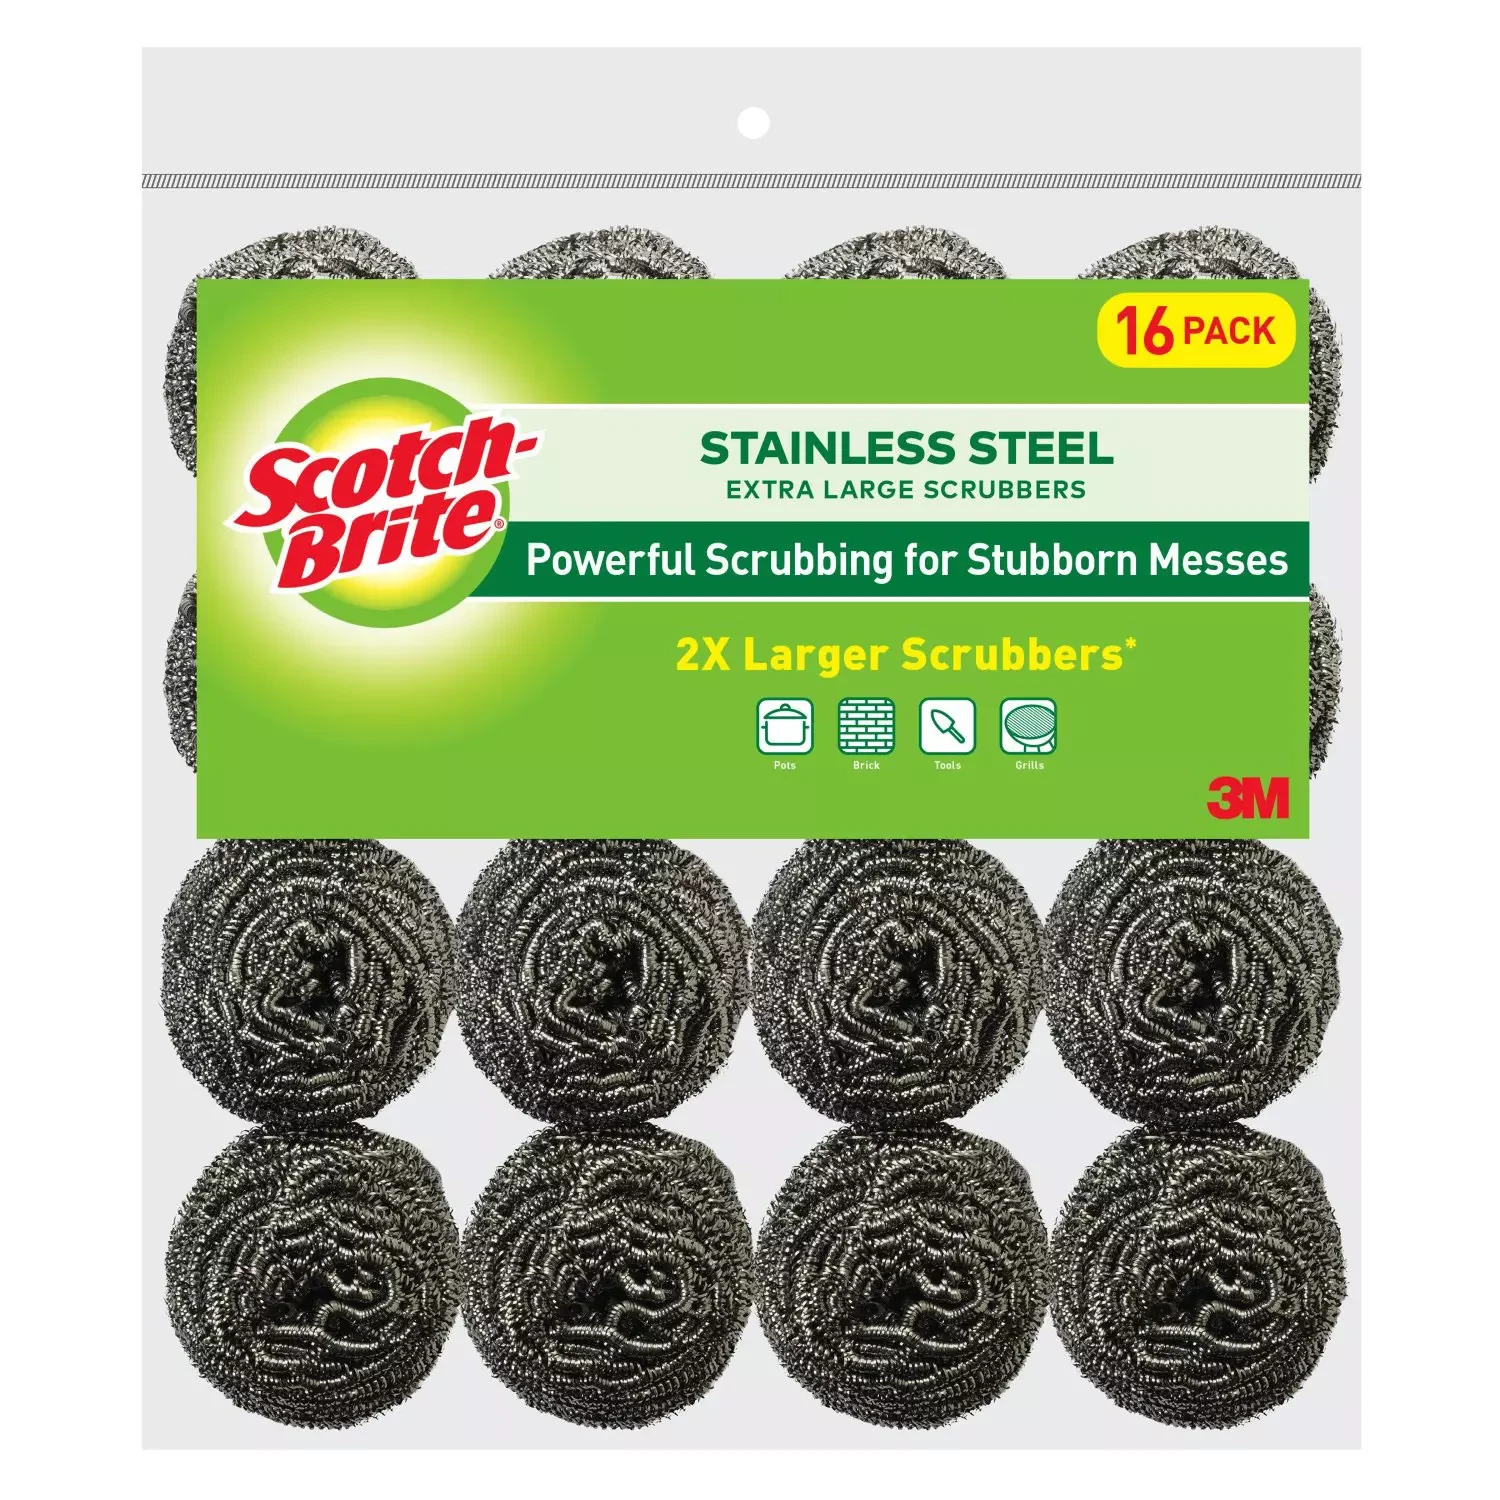 [SET OF 3] - Scotch-Brite 2x Larger Stainless Steel Scrubbers Club Pack, 16 Scrubbers Per Pack,